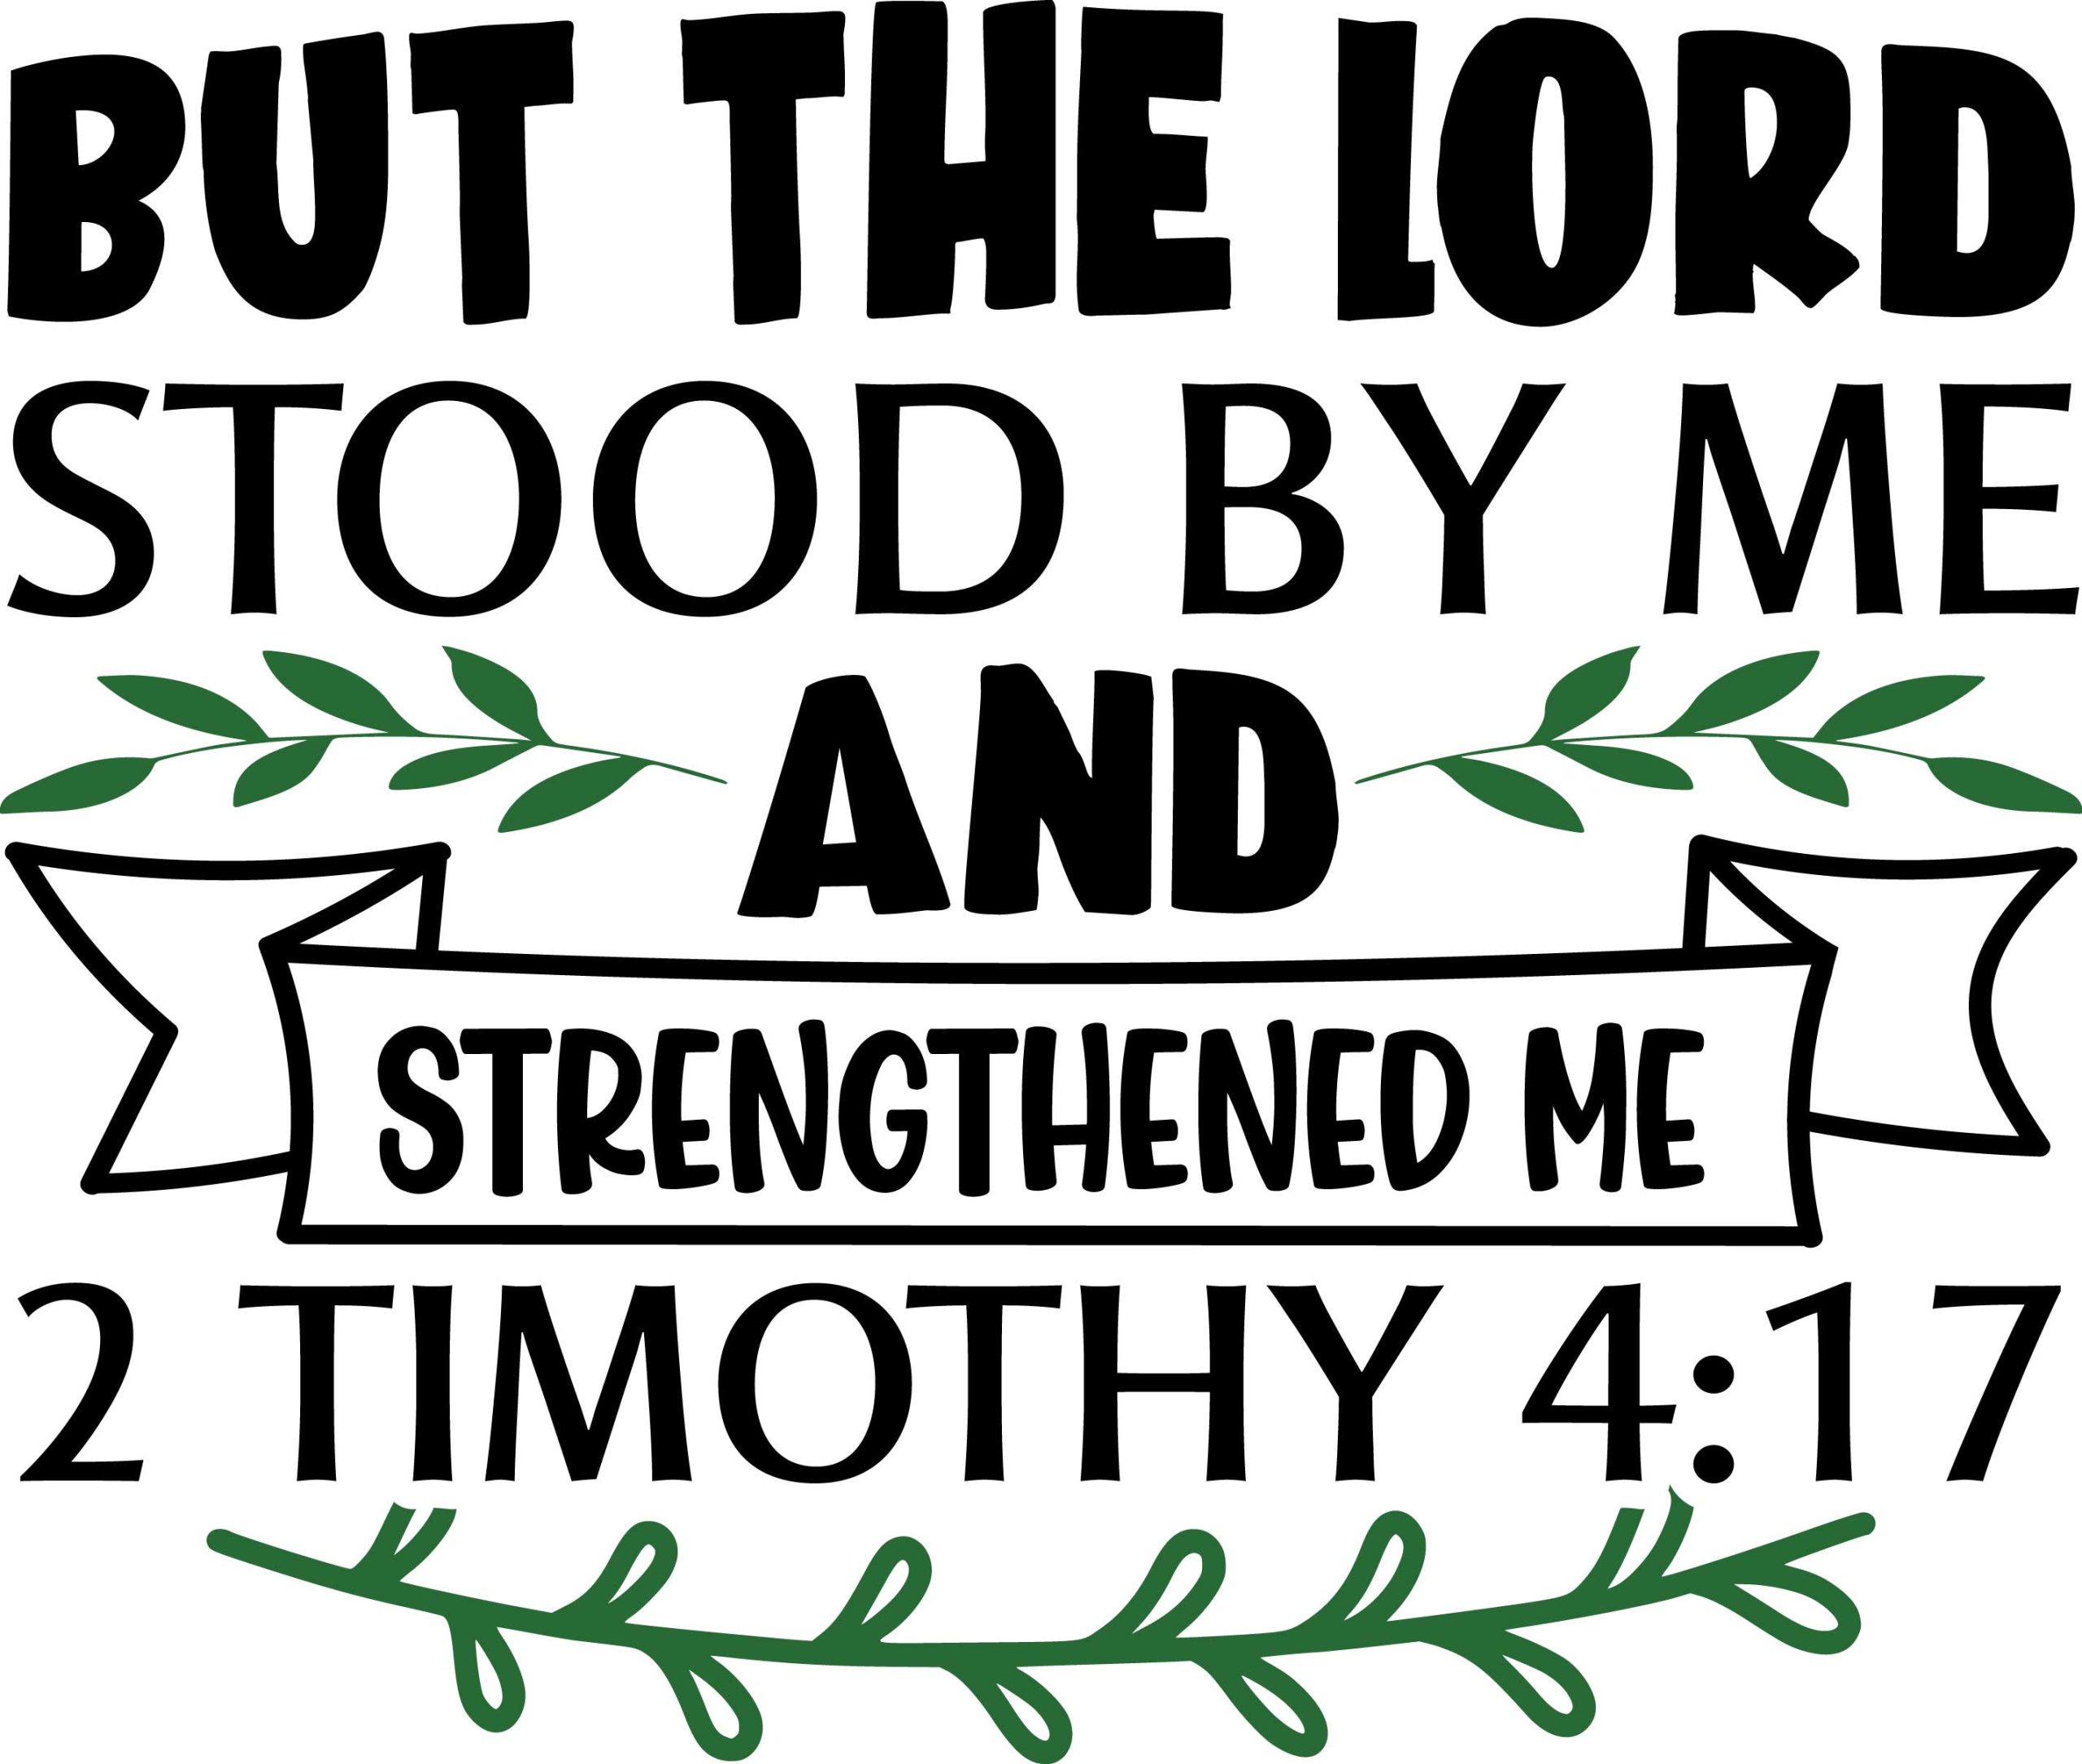 But the lord stood by me and strengthened me 2 Timothy 4:17, bible verses, scripture verses, svg files, passages, sayings, cricut designs, silhouette, embroidery, bundle, free cut files, design space, vector